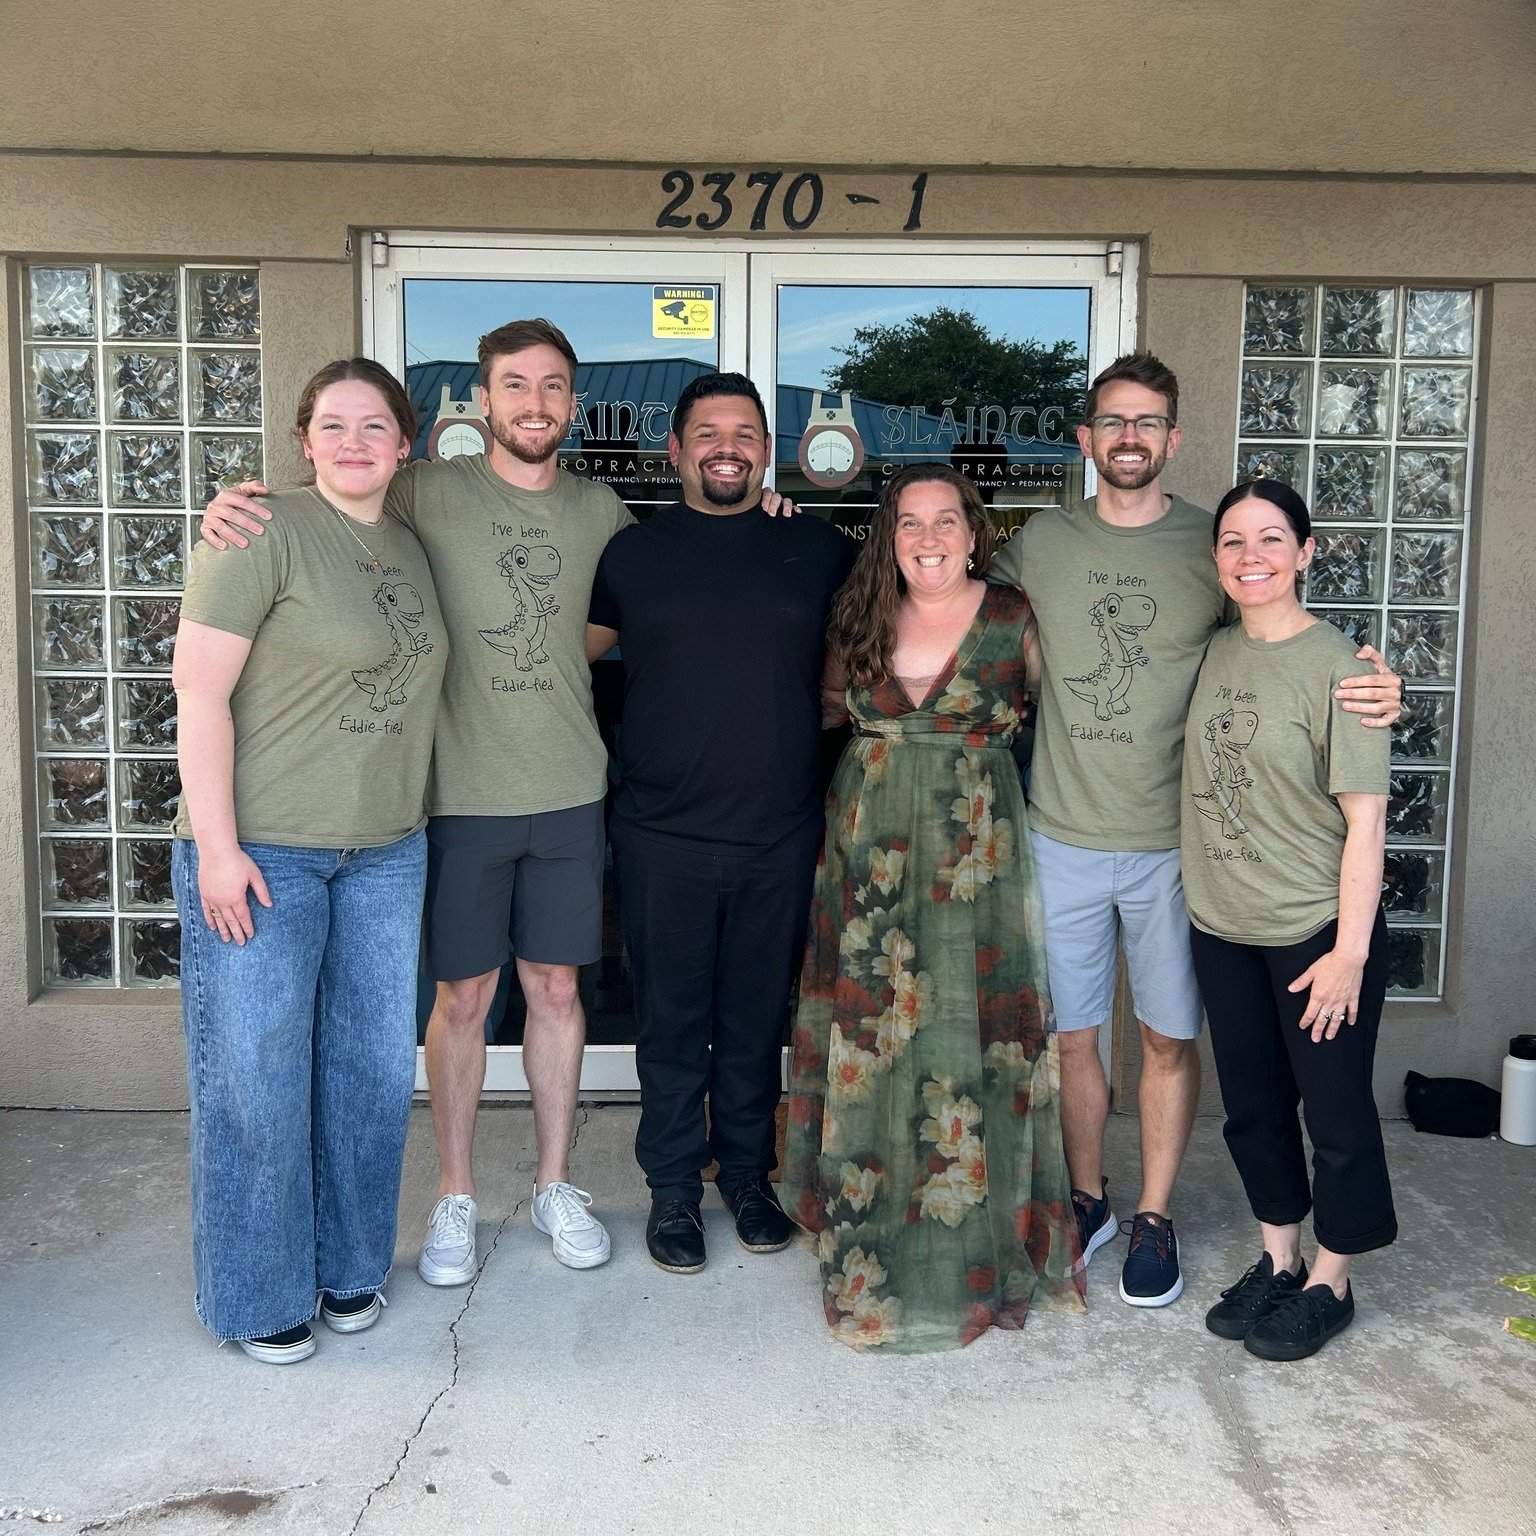 This past weekend, our team had the incredible opportunity to travel to Jacksonville Beach, FL and learn from some of our mentors. Drs. Vincent &amp; Bridget Farrar at Slainte Chiropractic. 

One of the biggest takeaways we discussed as a team was th